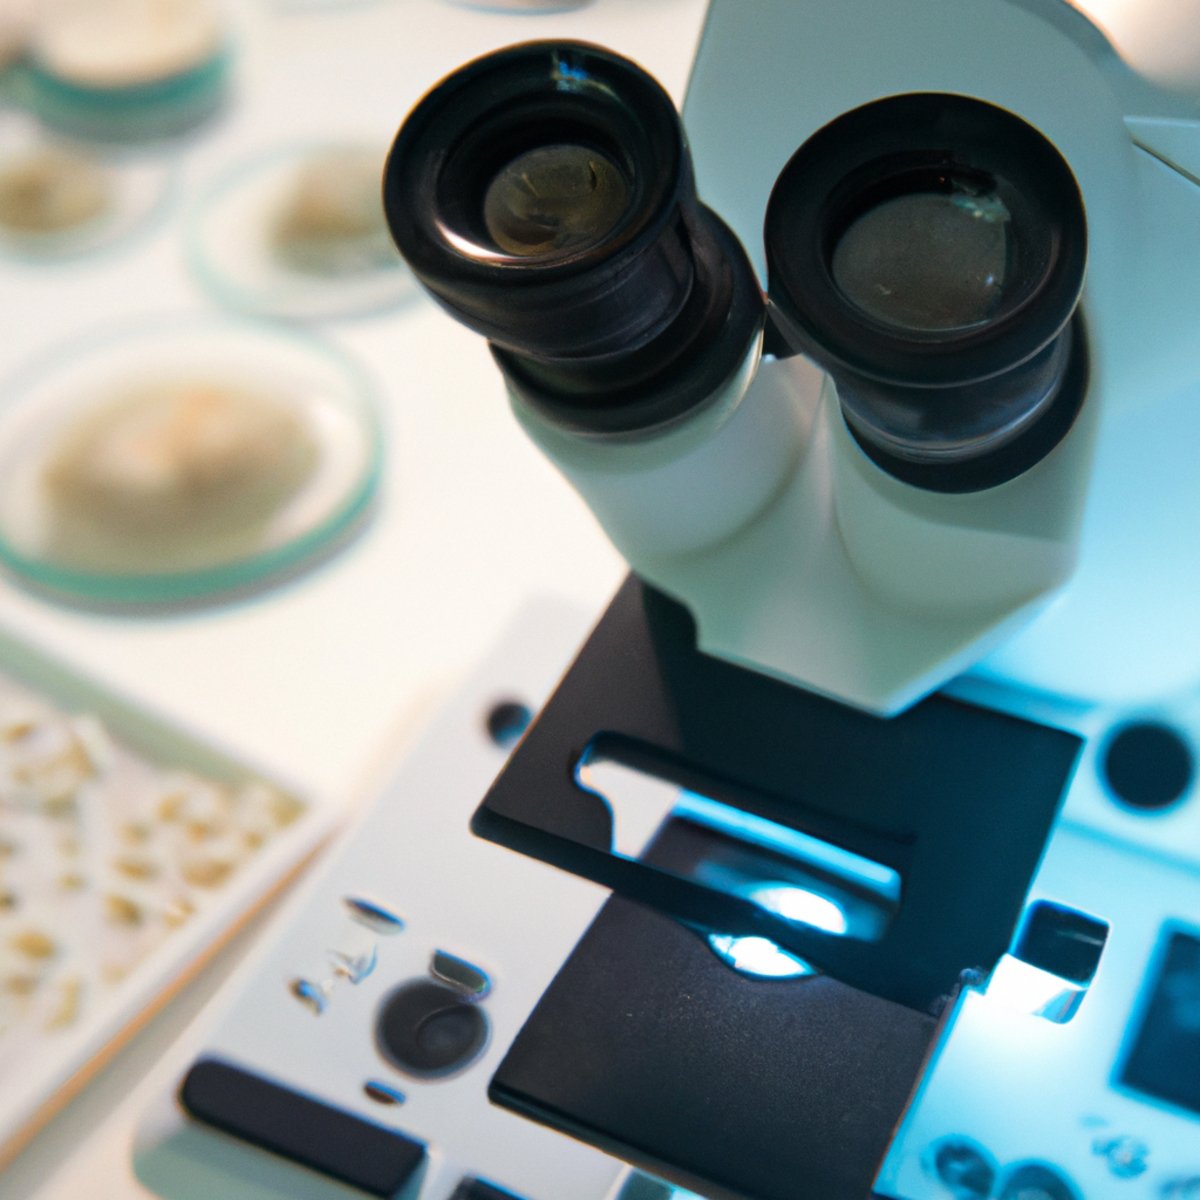 Close-up of white microscope focused on schistosome eggs, surrounded by scientific instruments, emphasizing research on schistosomiasis.